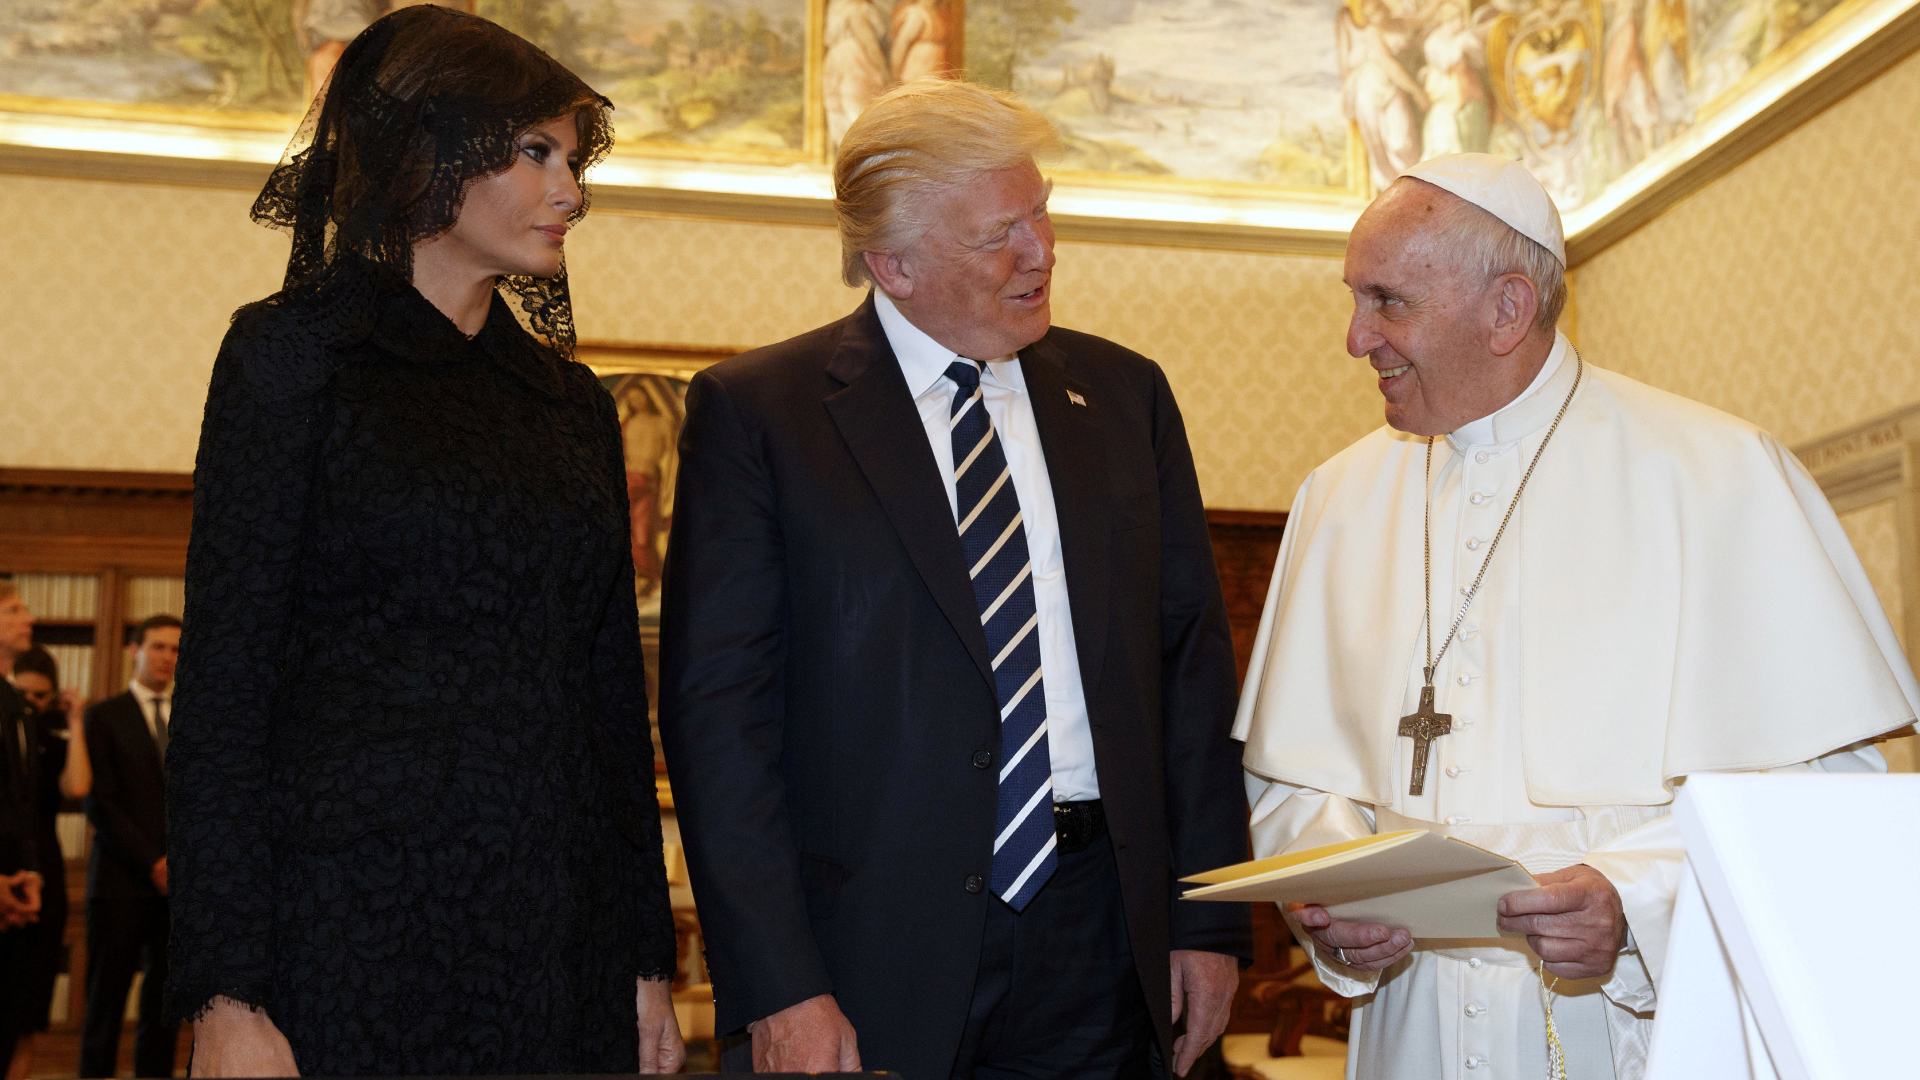 Pope welcomes Trump to the Vatican despite past disagreements - The Washington Post